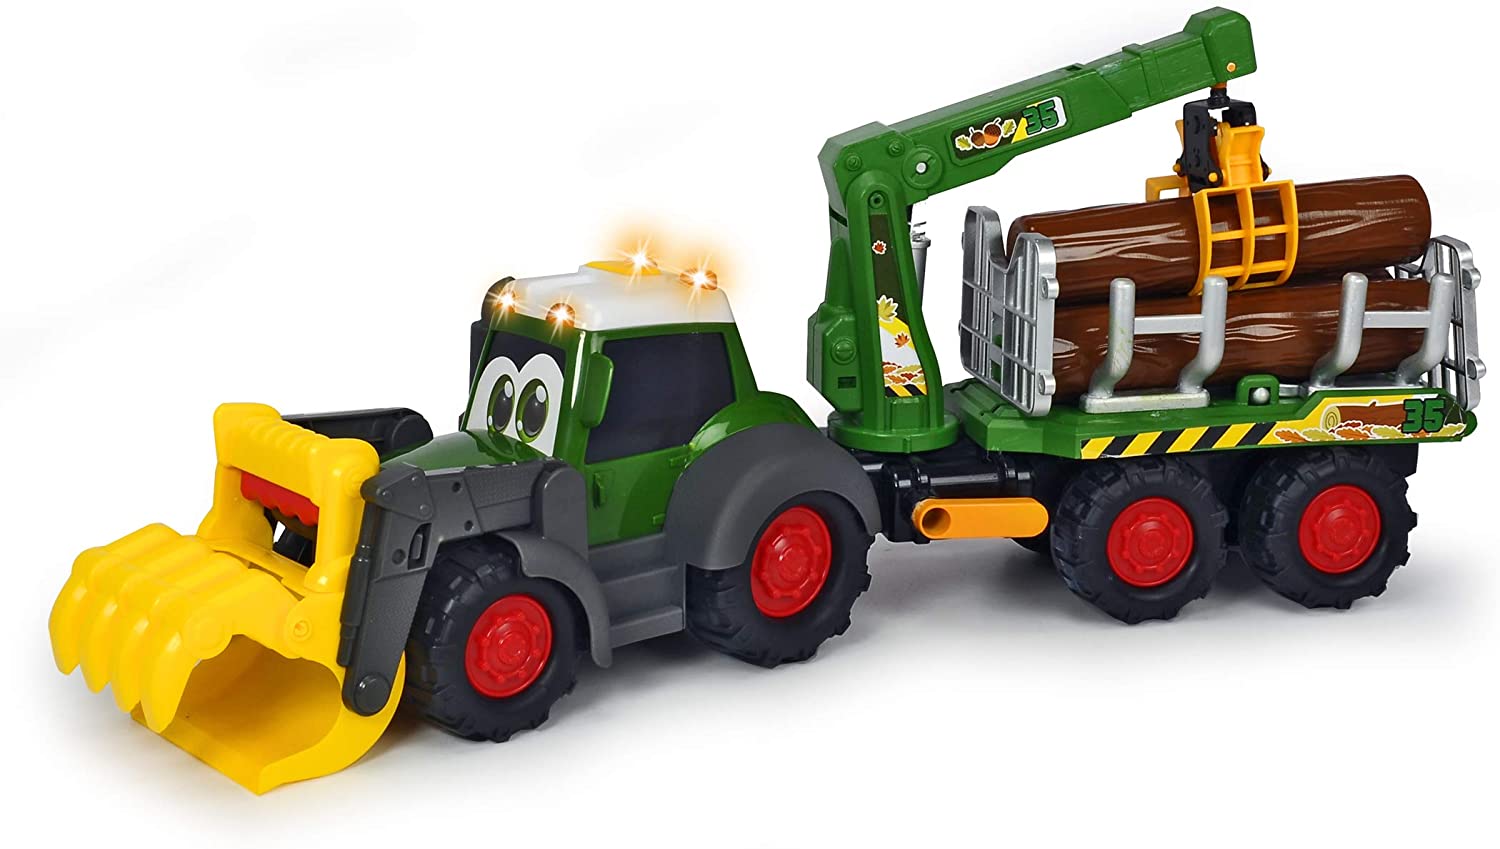 Dickie Toys Happy Fendt Farm Trailer Or Forestry Tractor, Green